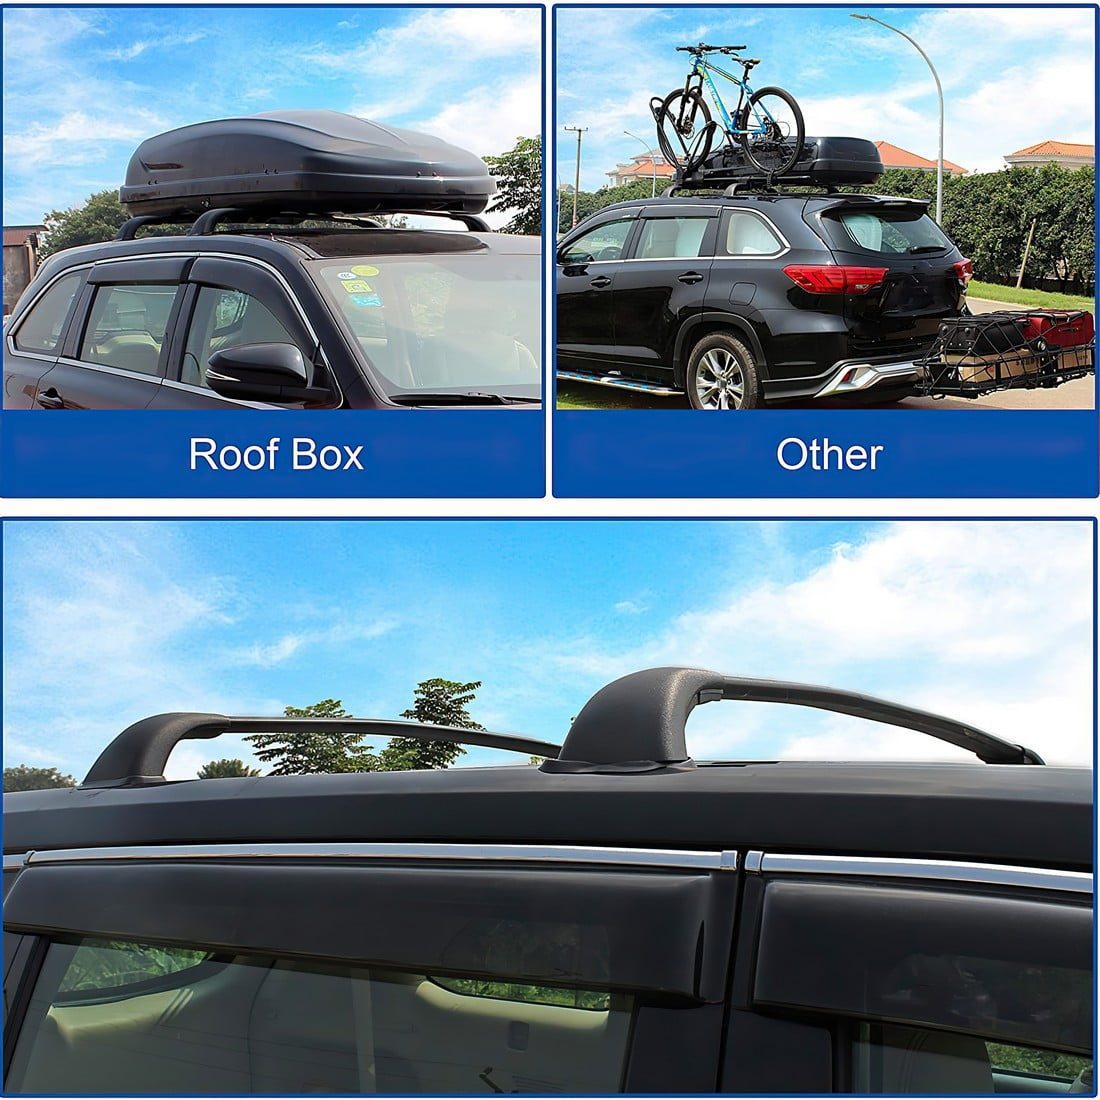 TRIL GEAR Top Roof Rail Rack Cross Bars Fit For 2014 2015 2016 2017 2018 2019 Toyota Highlander XLE Limited Black Aluminum Luggage Carrier